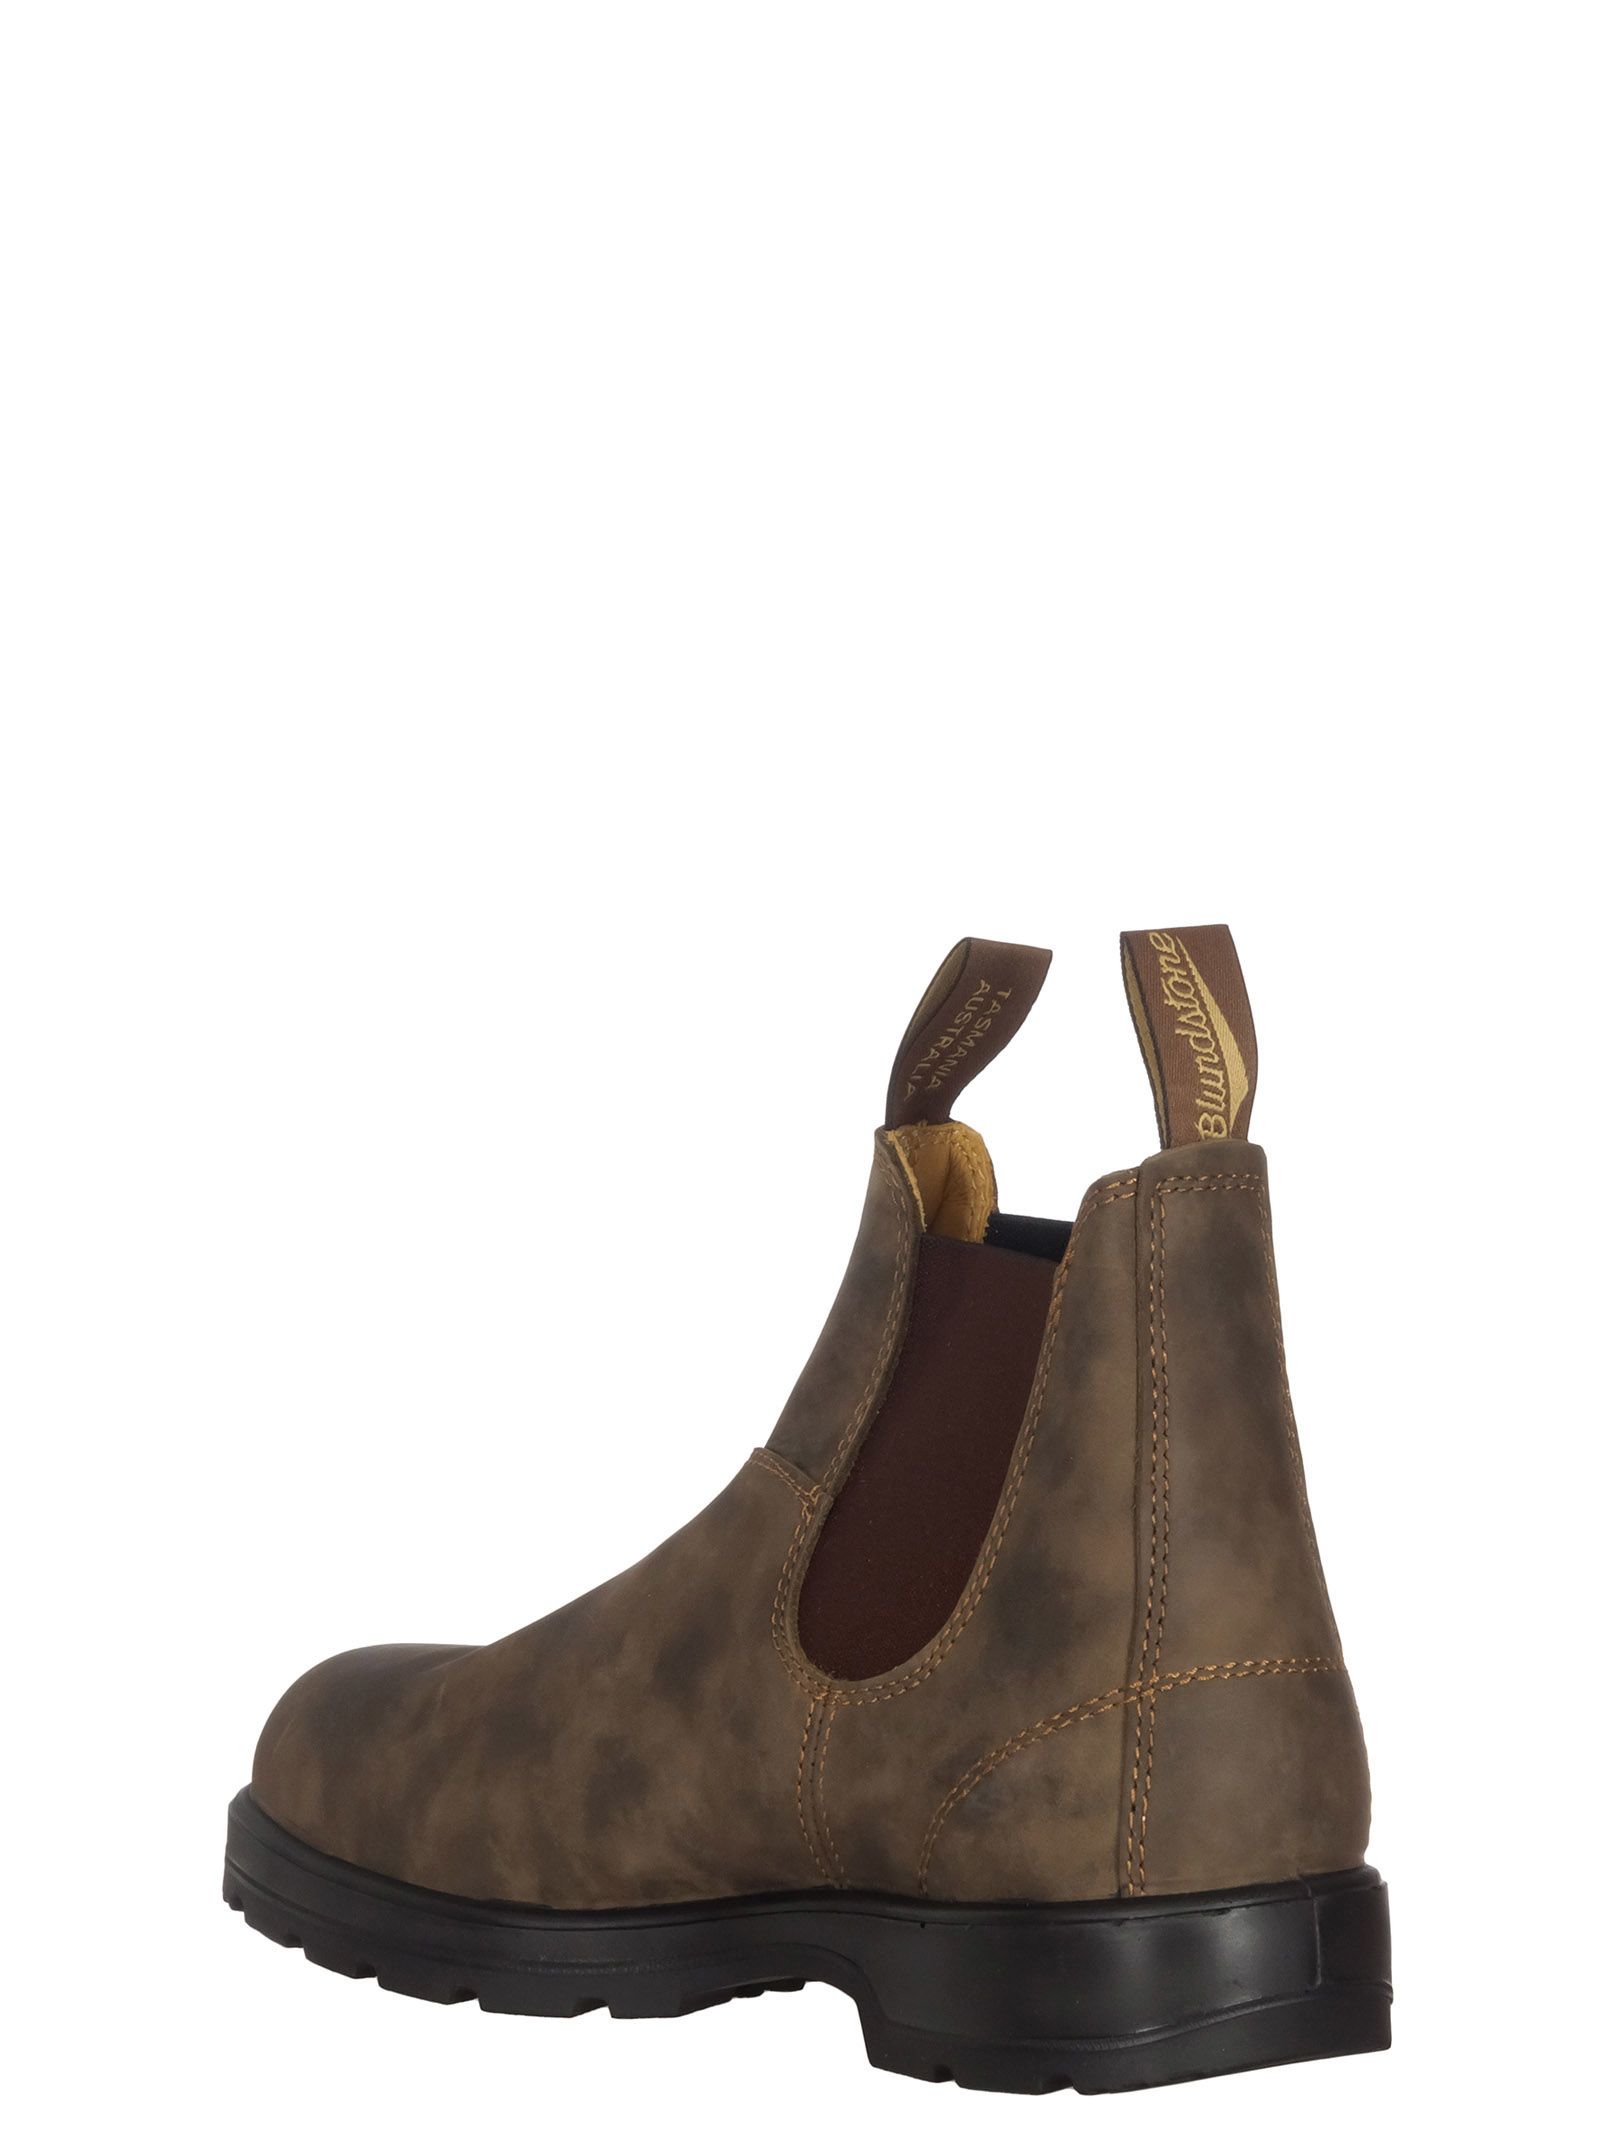 italist | Best price in the market for Blundstone Blundstone Rustic ...